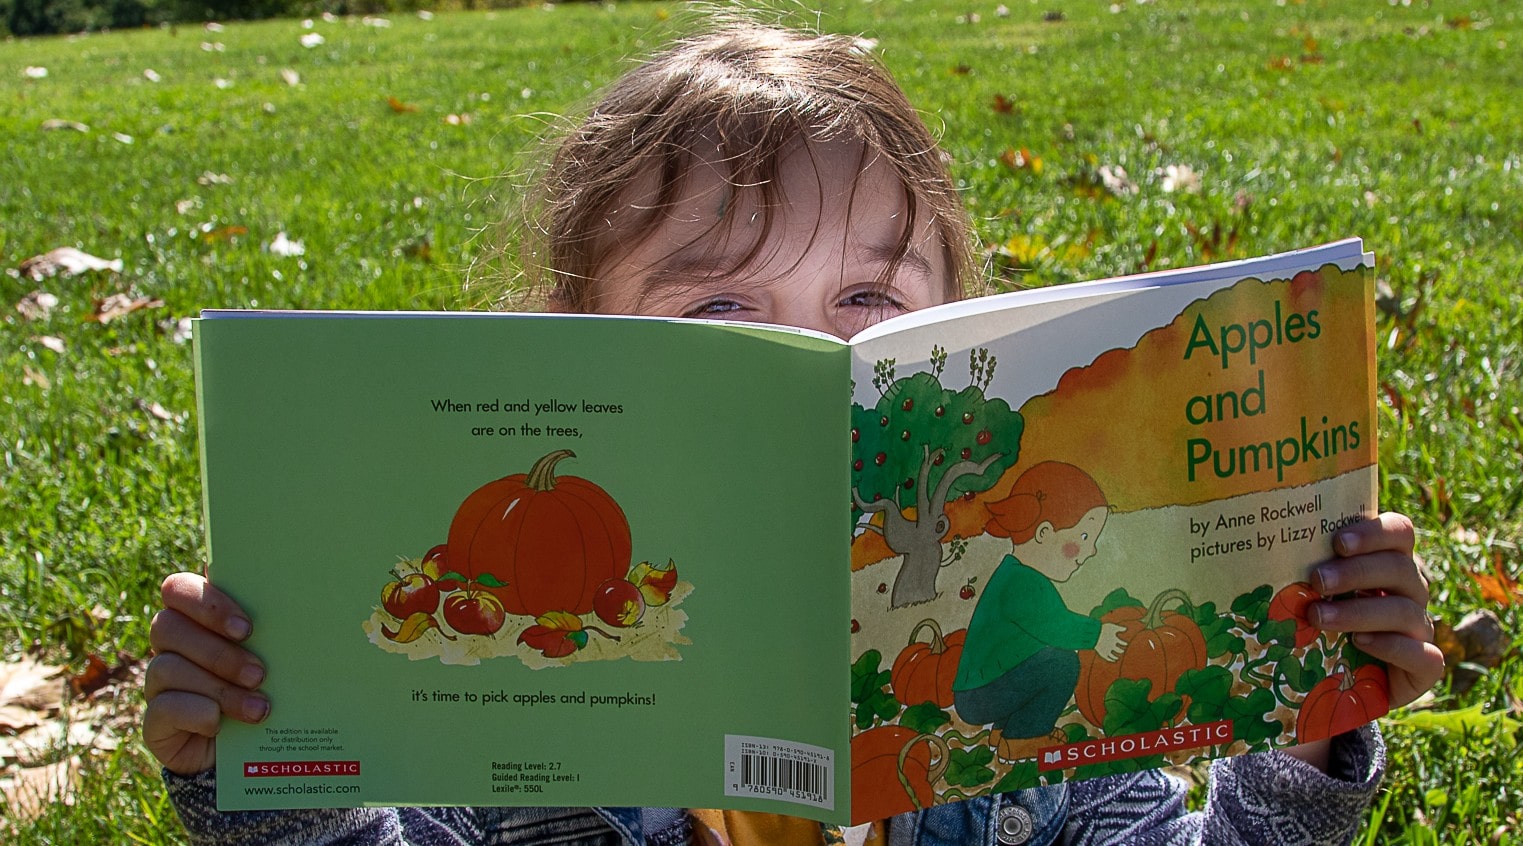 A young girl with dark blonde hair is outside sitting in the grass, with a book entitled Apples and Pumpkins, and she peeks over the book to look at the camera